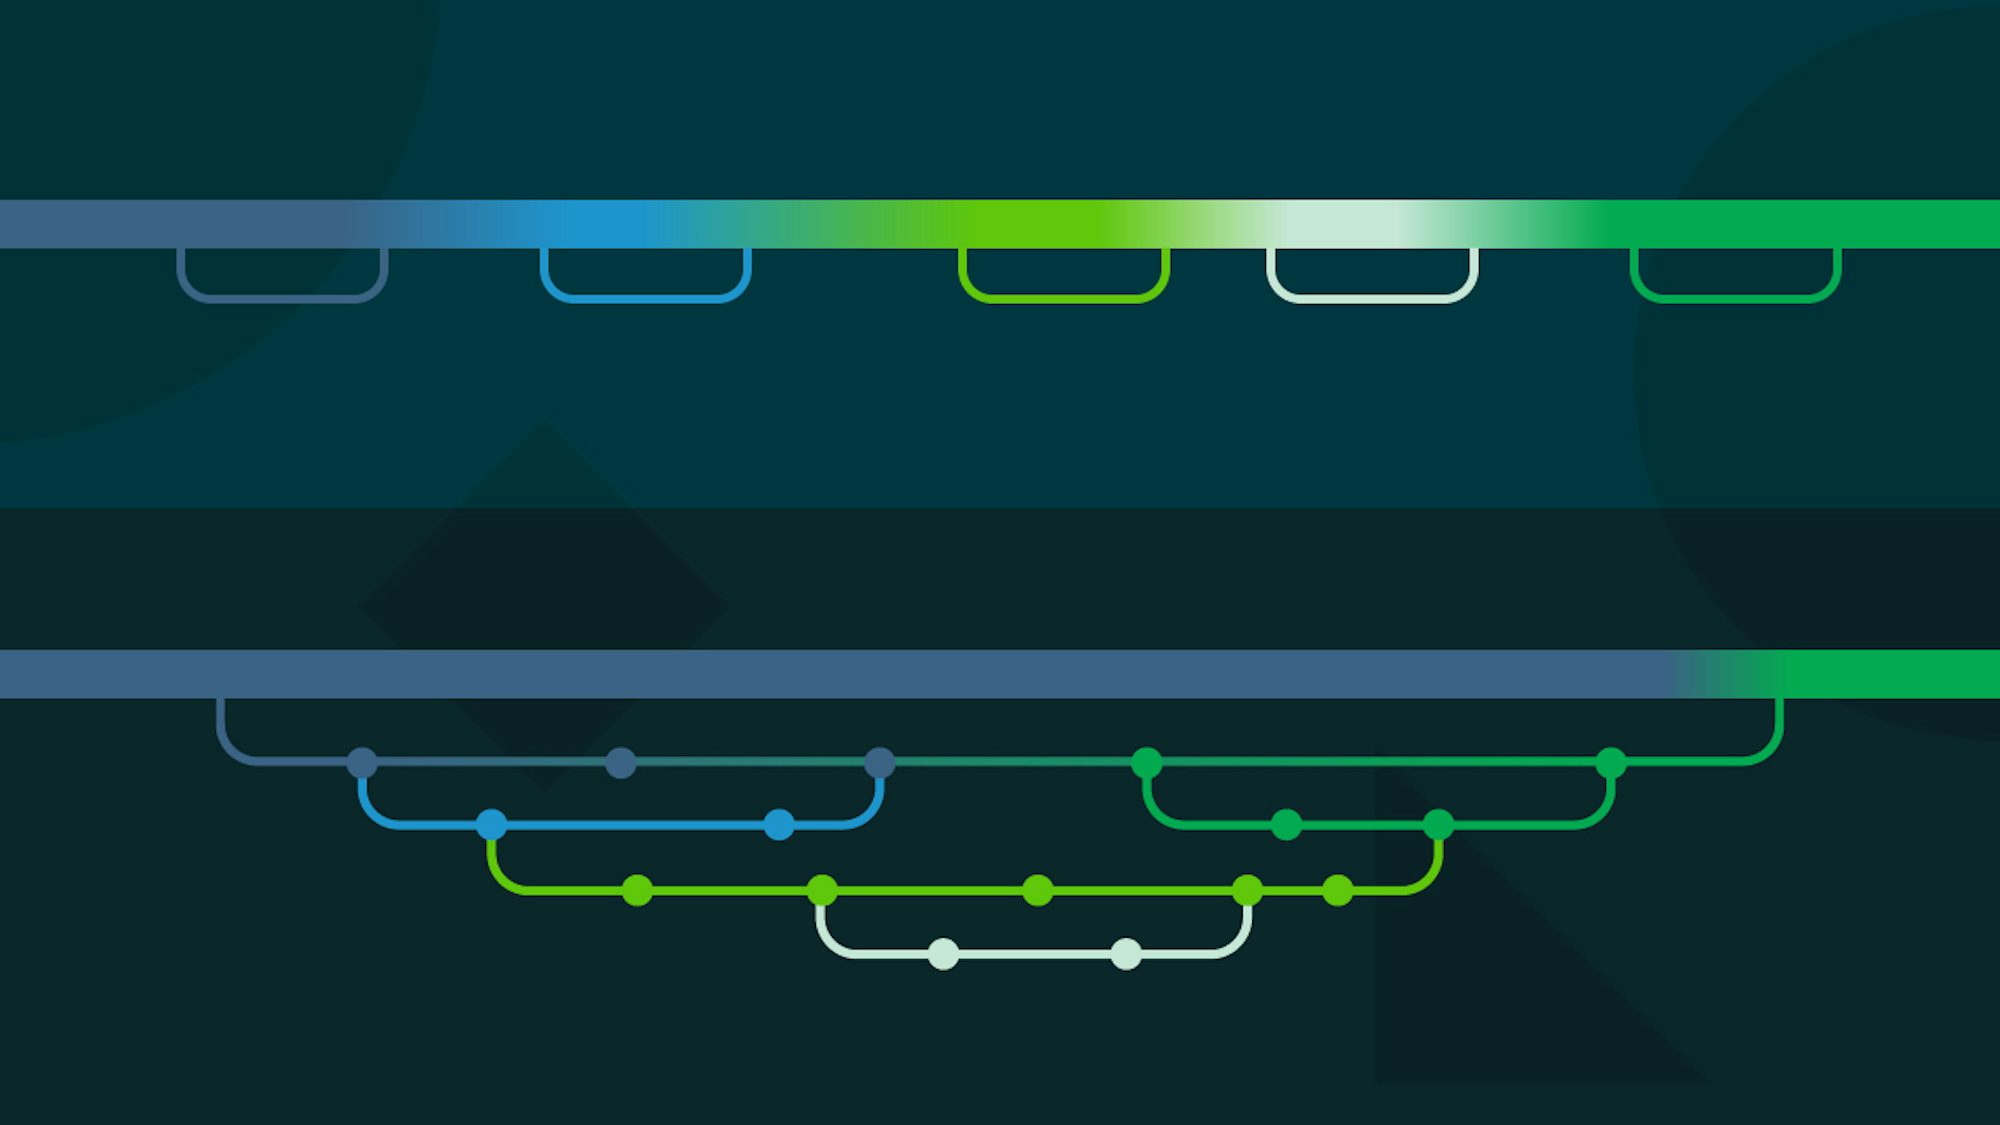 Two stylized pipelines - one shows many small additions, while the other shows multiple layers building upon a single large addition to the main branch.